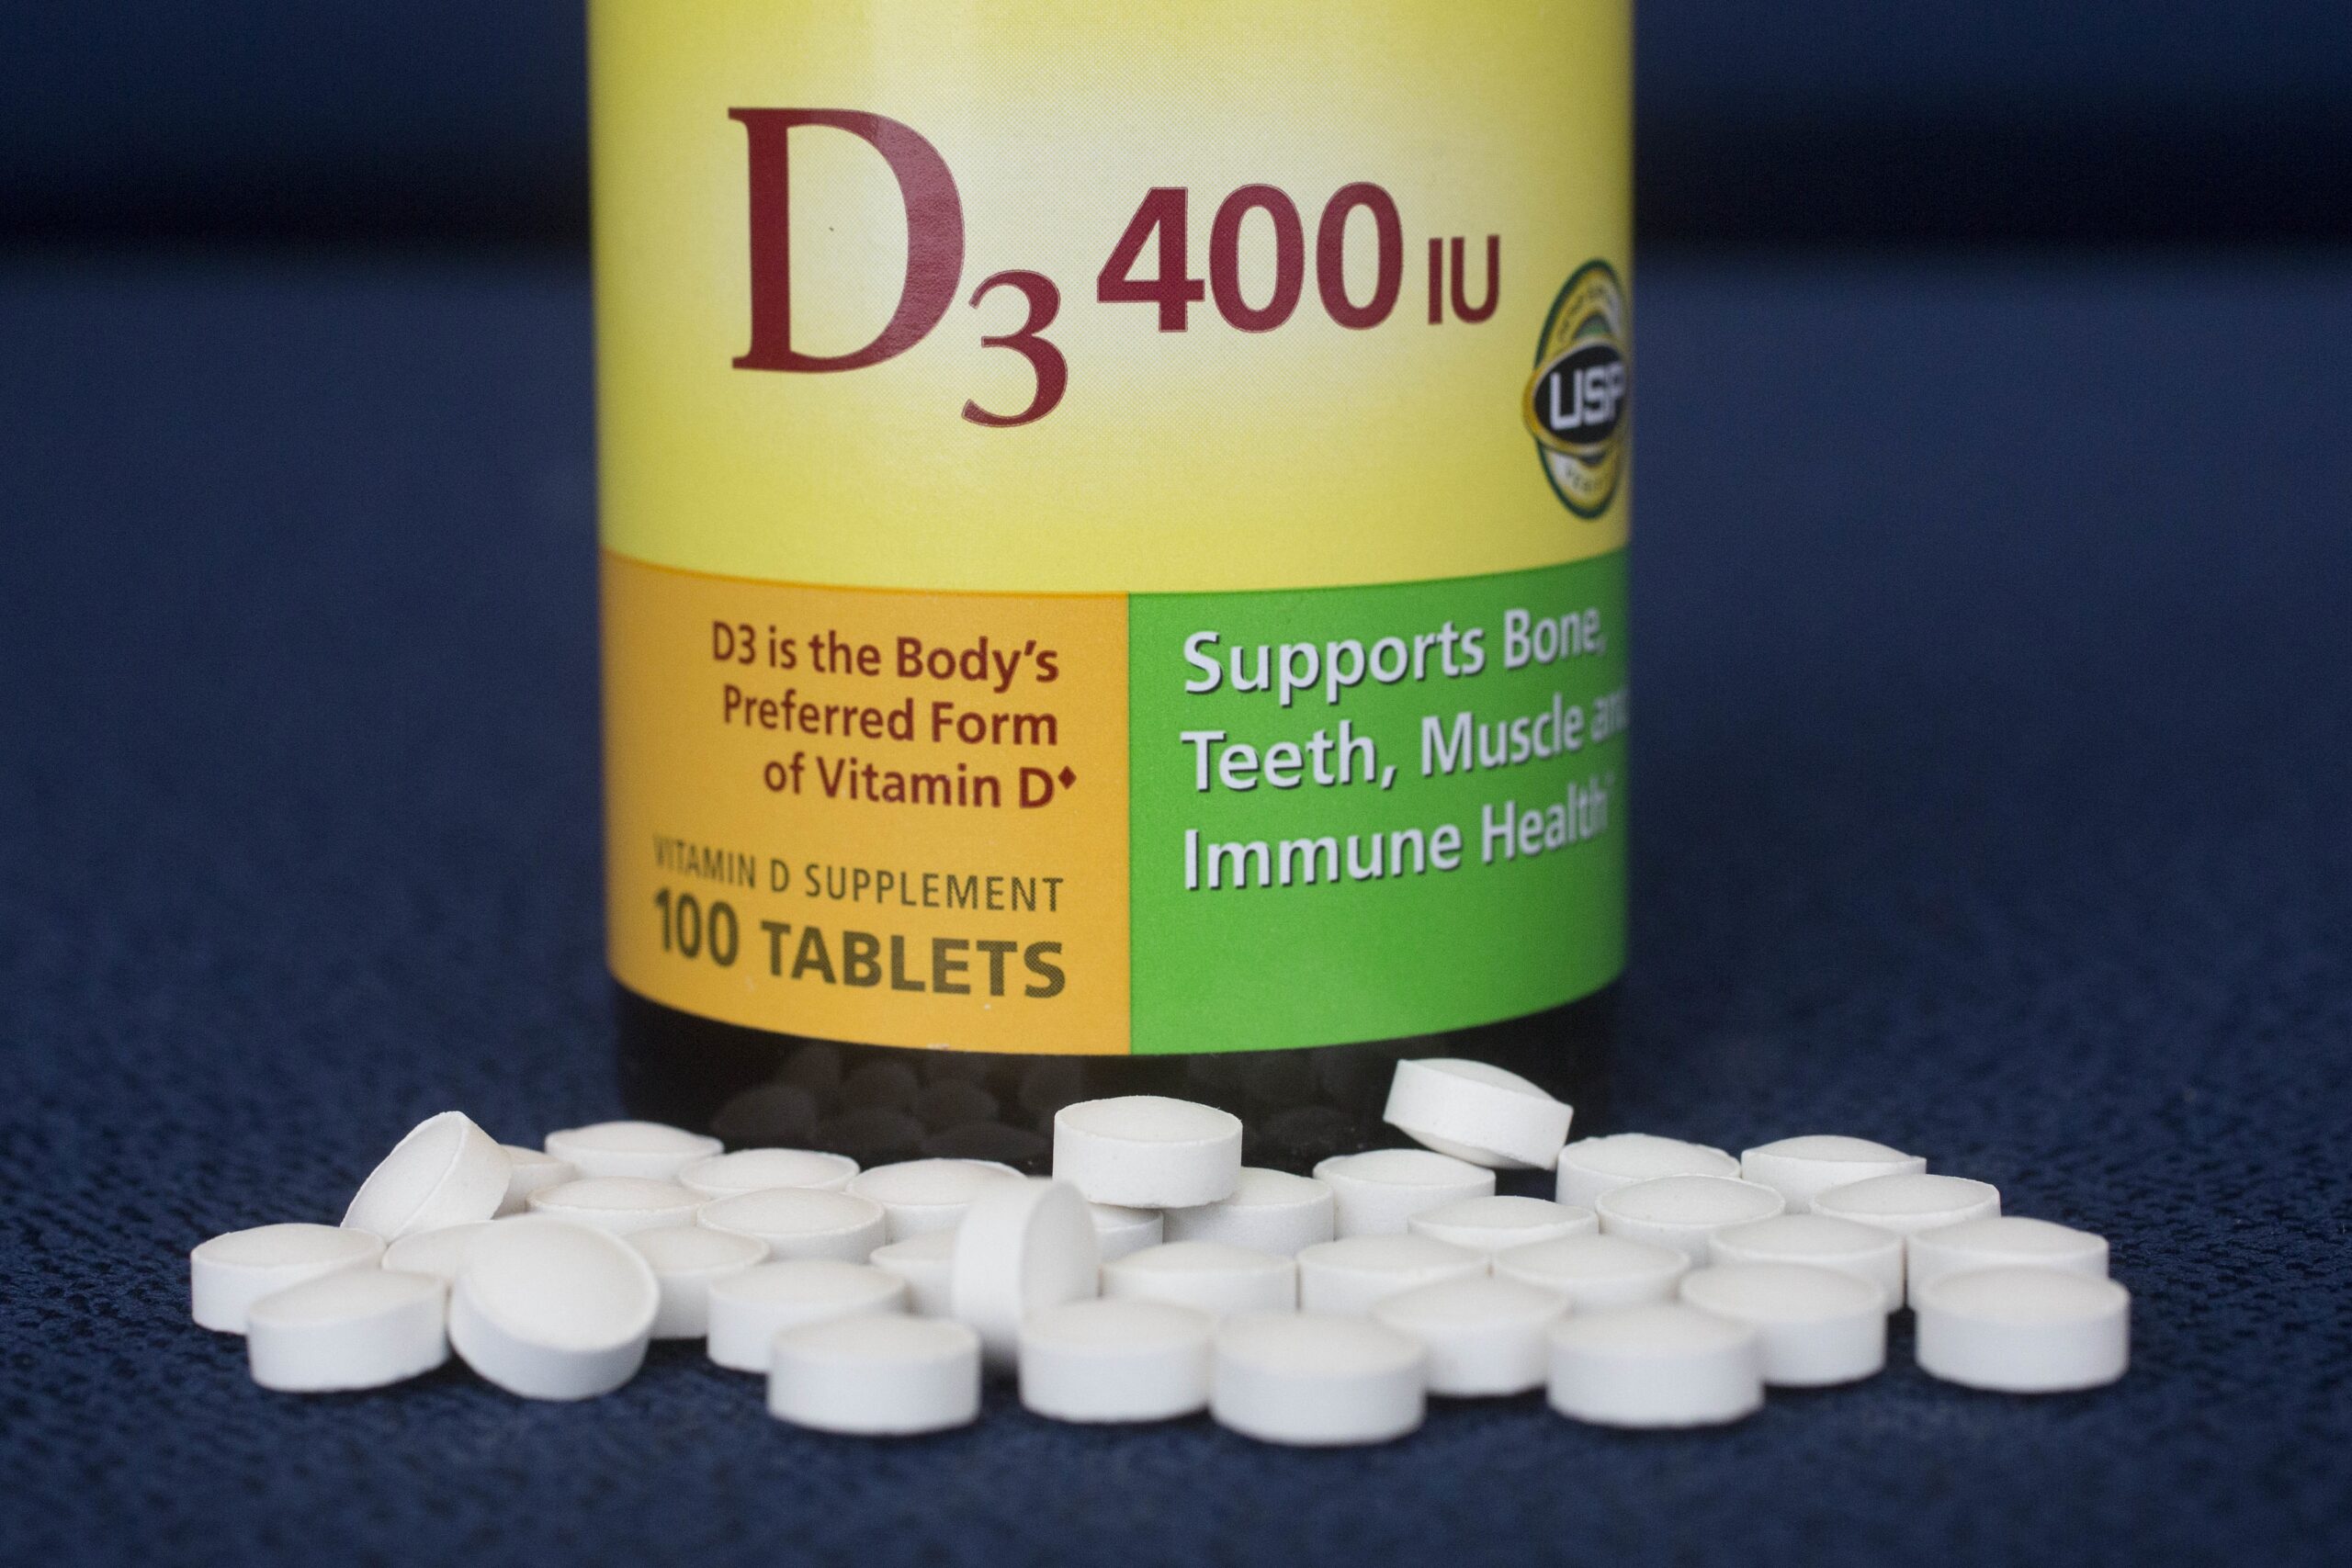 Zorba Paster: Consider A Supplement For Vitamin D